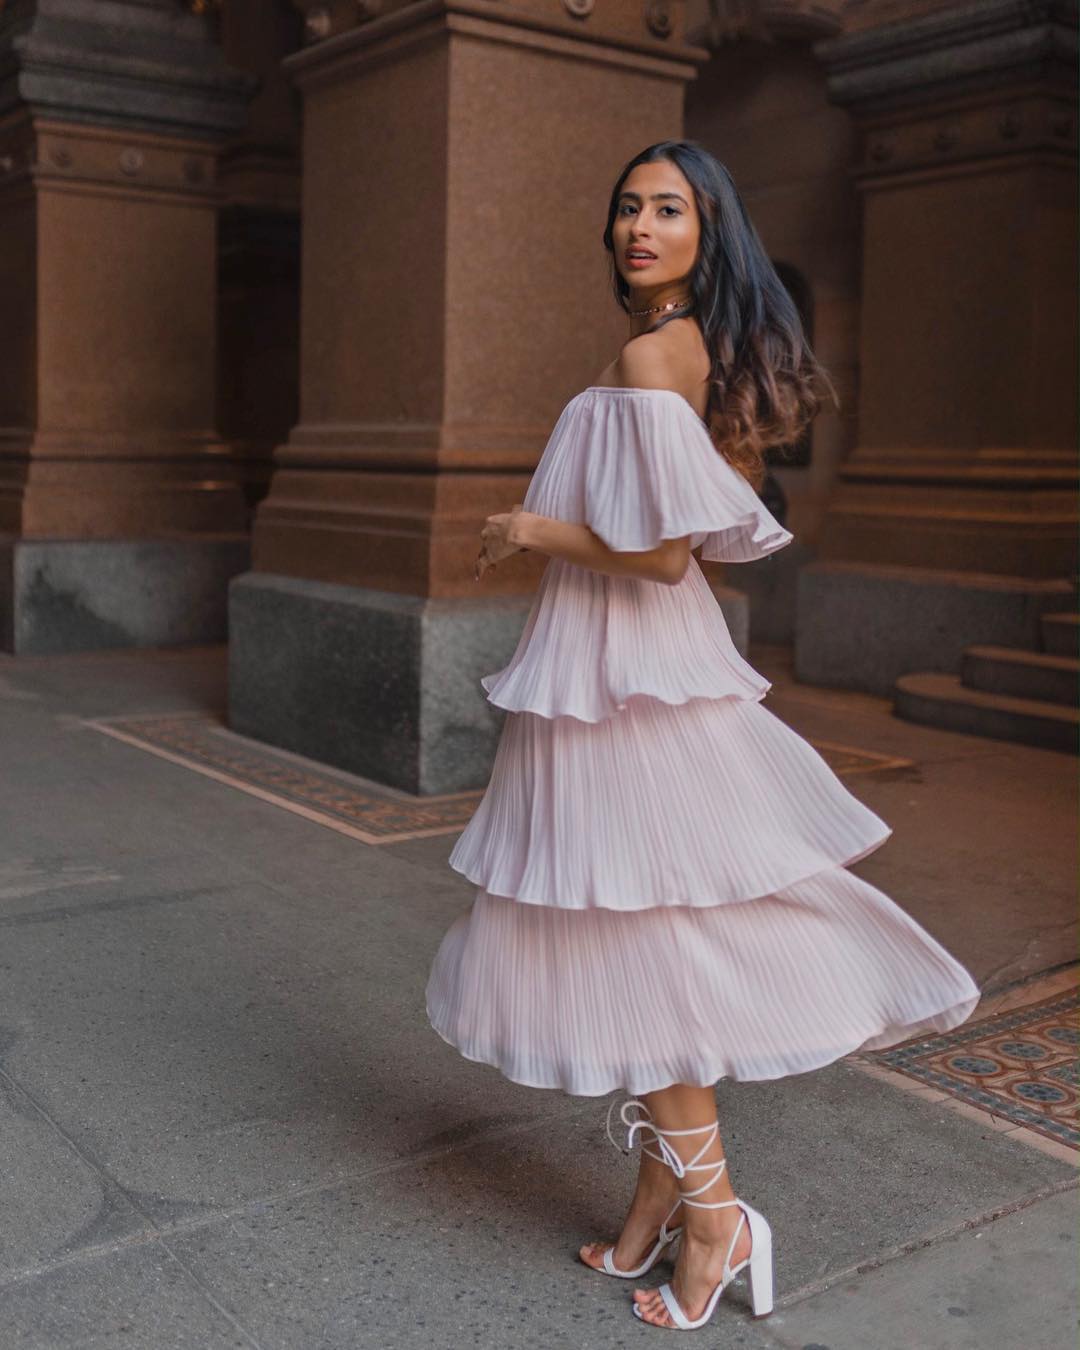 Prom Shoe Styles: 5 Stunning Trends to Try on the Big Night-and Beyond -  Lulus.com Fashion Blog